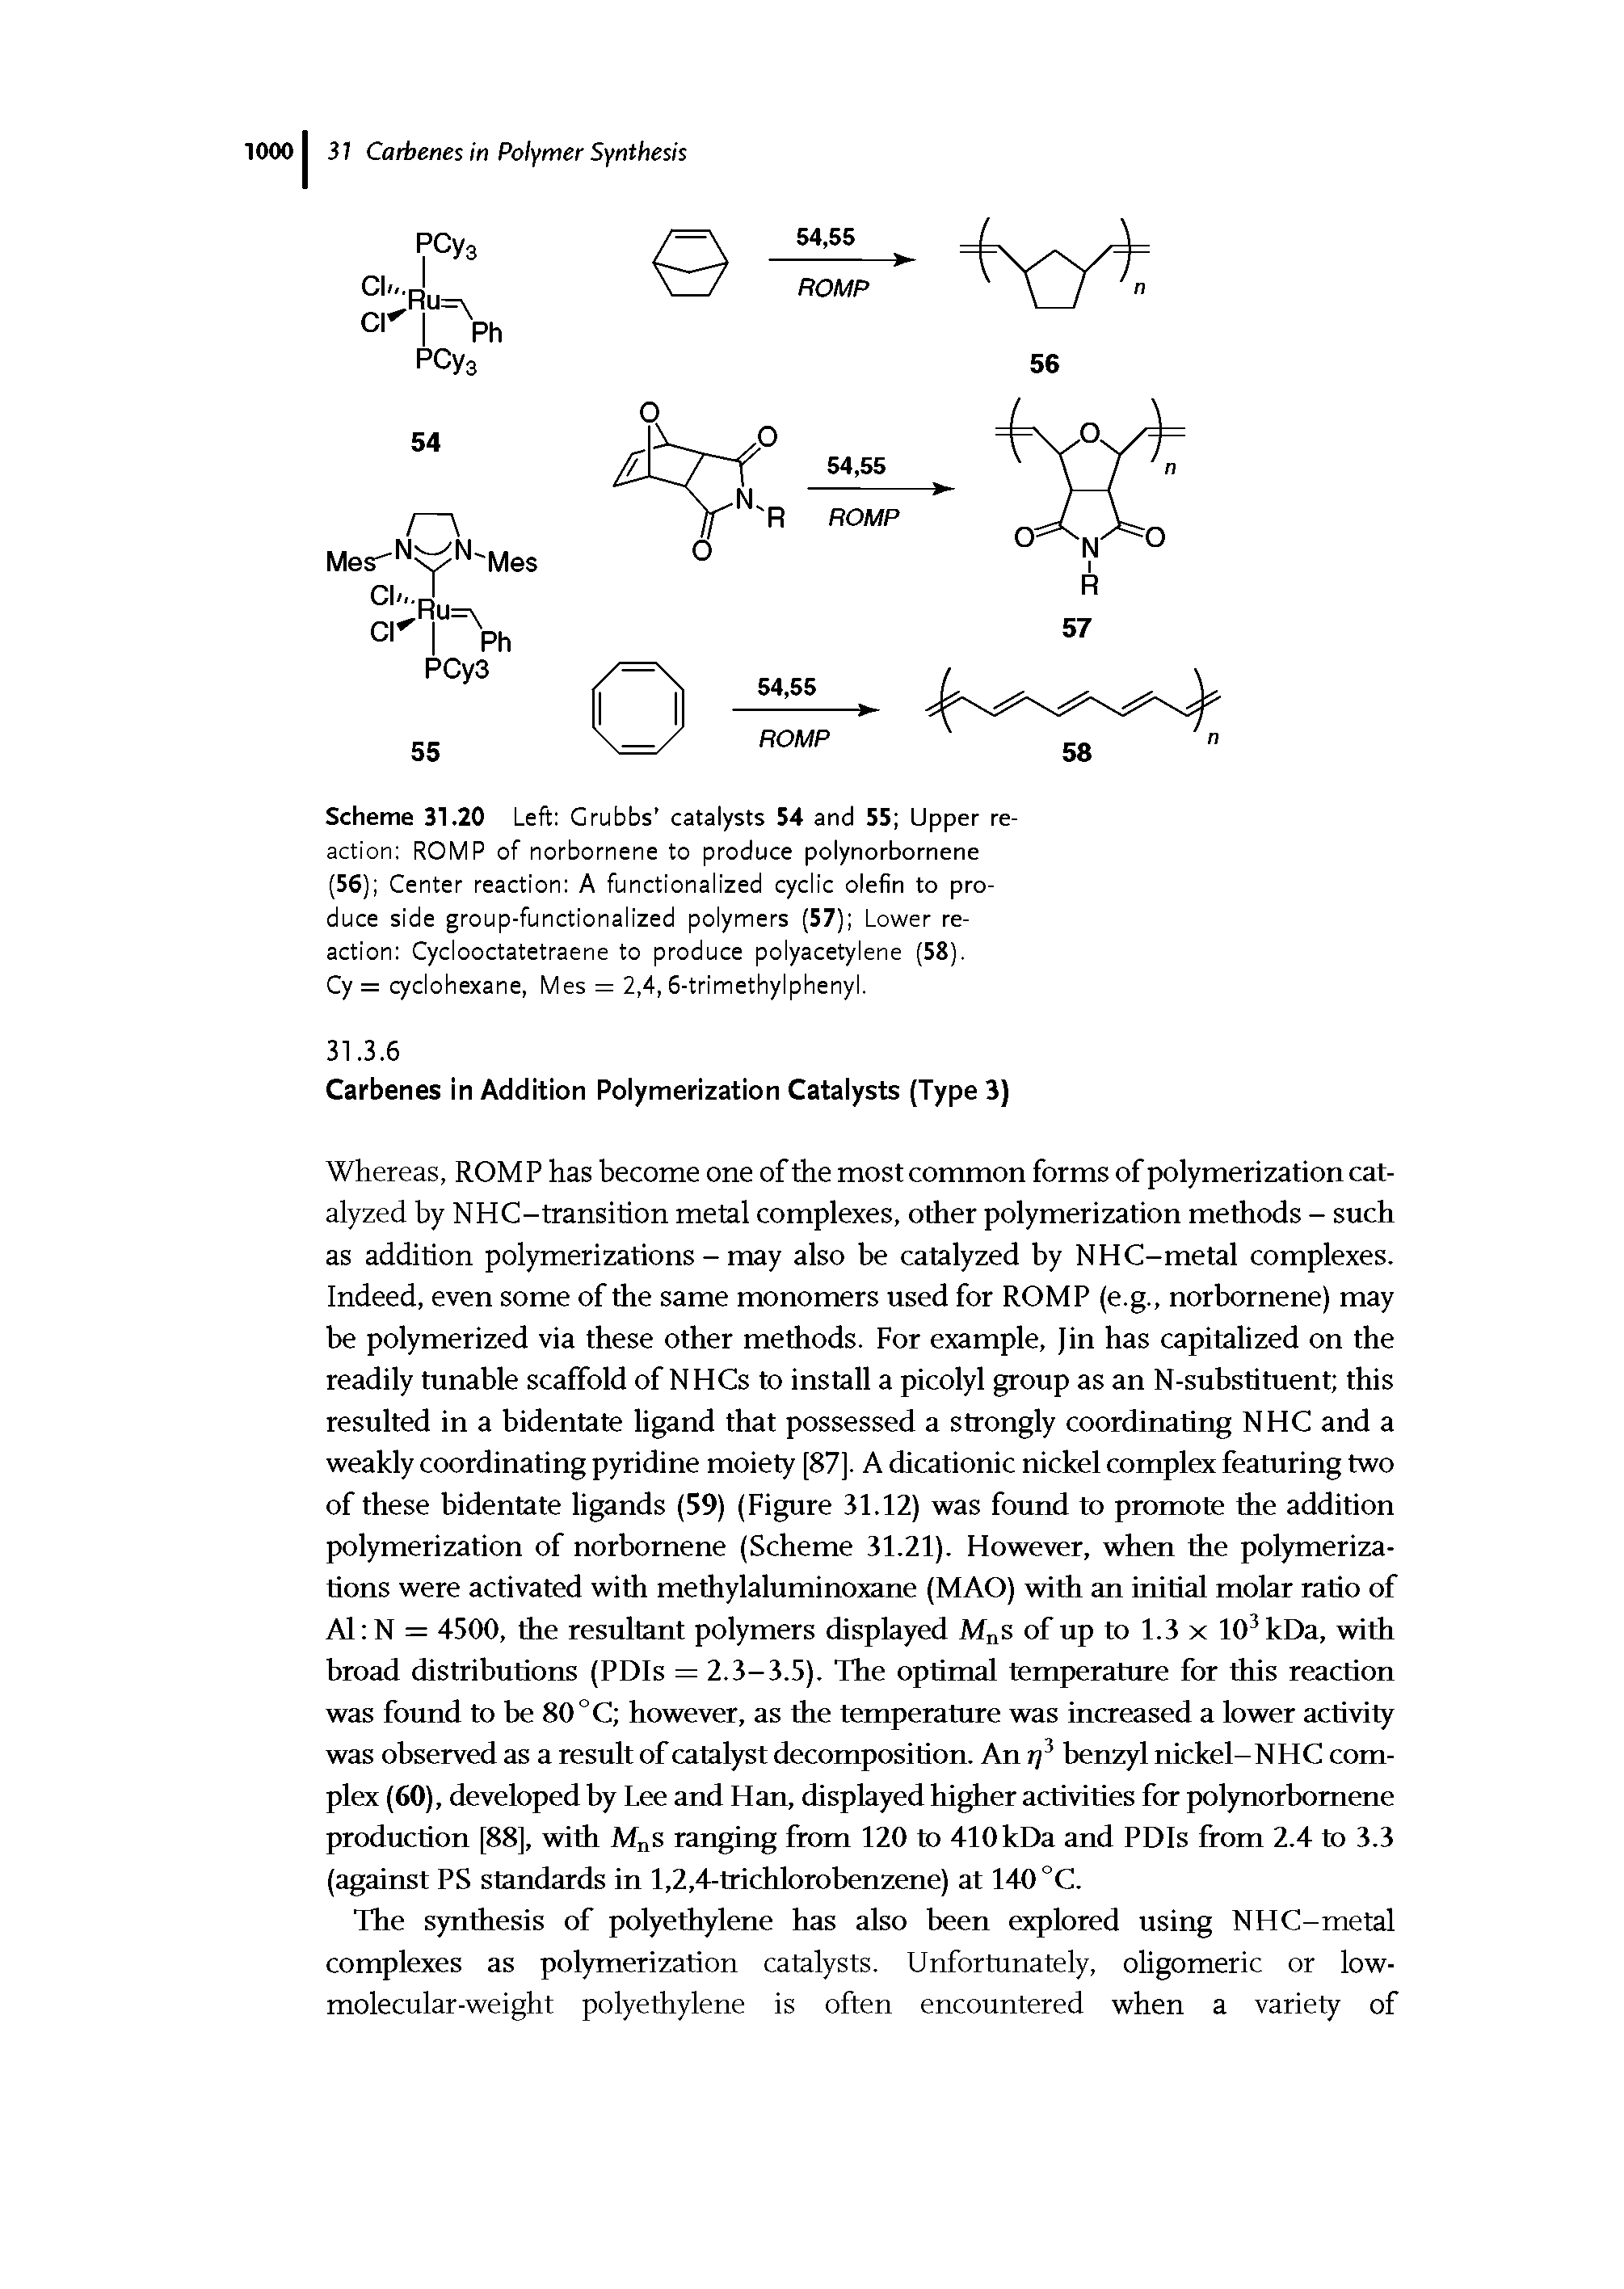 Scheme 31.20 Left Grubbs catalysts S4 and 55 Upper reaction ROMP of norbornene to produce polynorbornene (56) Center reaction A functionalized cyclic olefin to produce side group-functionalized polymers (57) Lower reaction Cyclooctatetraene to produce polyacetylene (58).